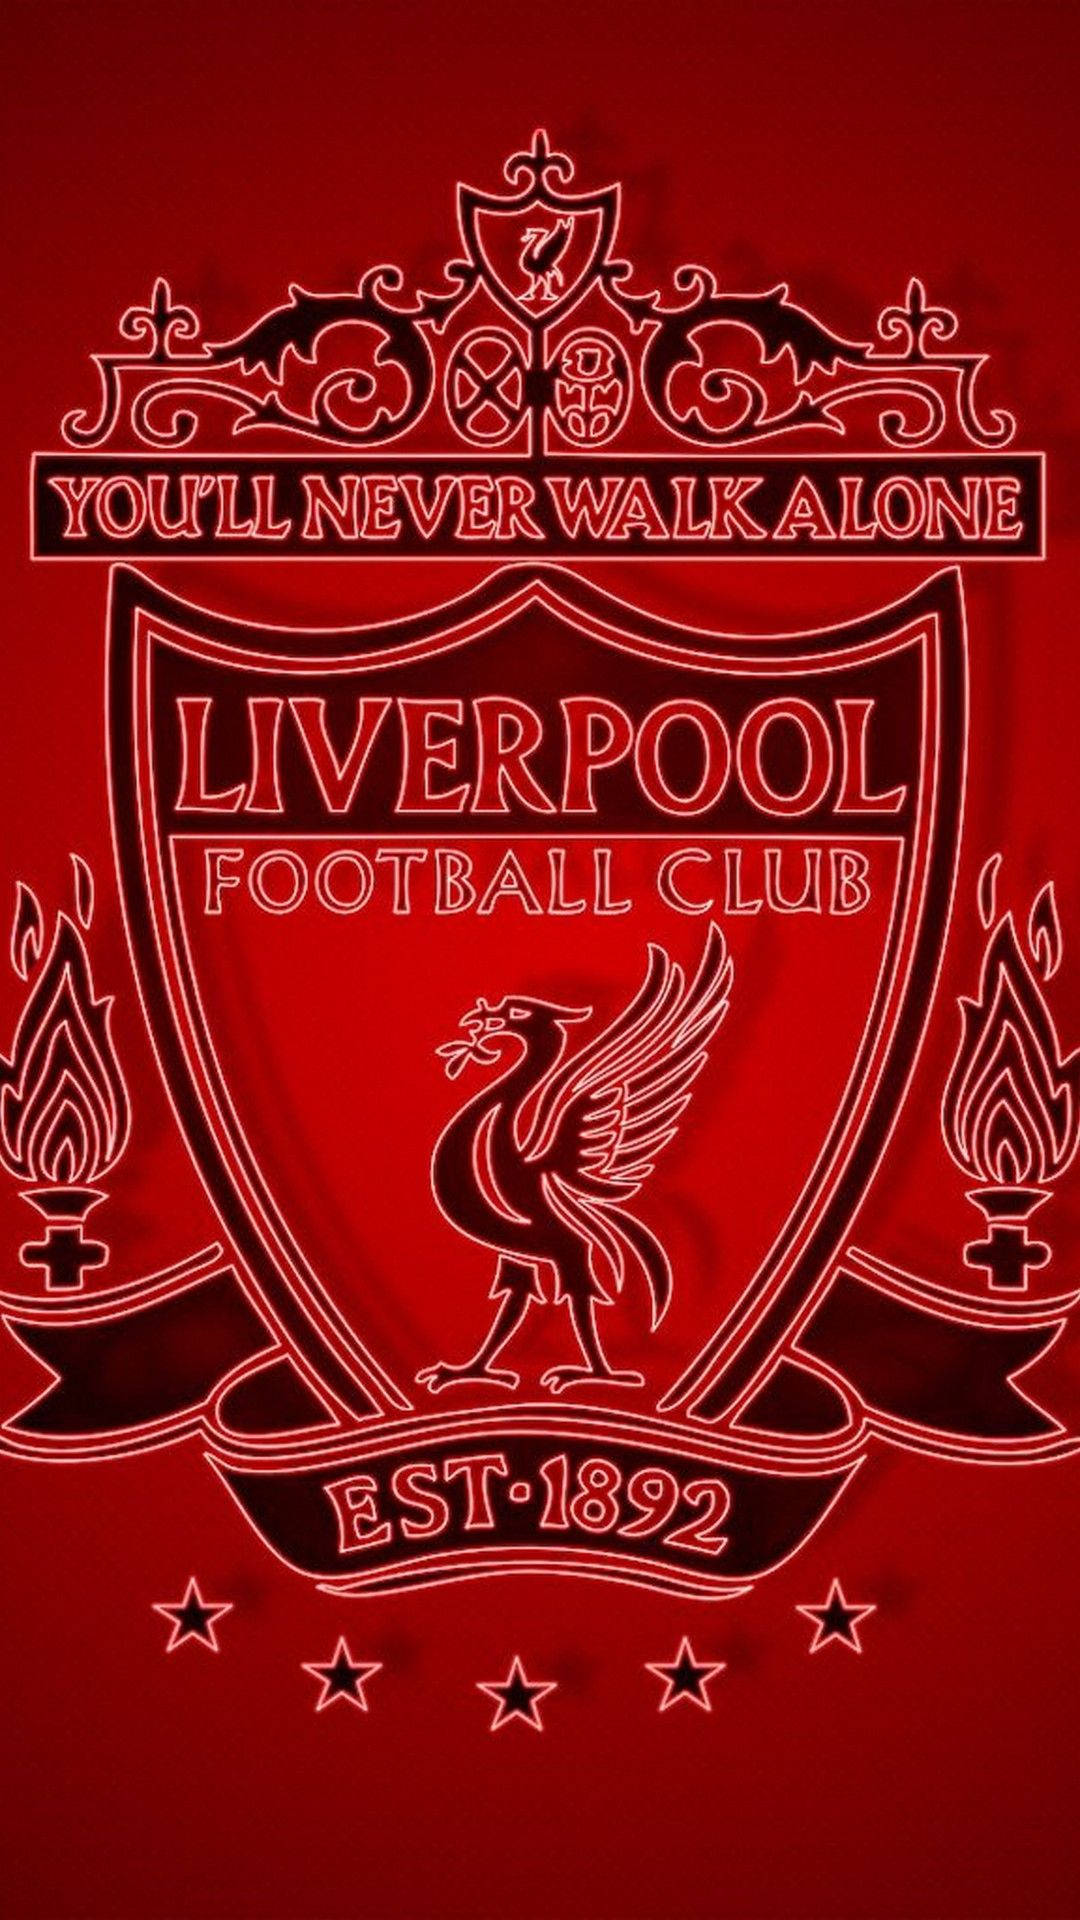 Show your support for Liverpool Football Club Wallpaper